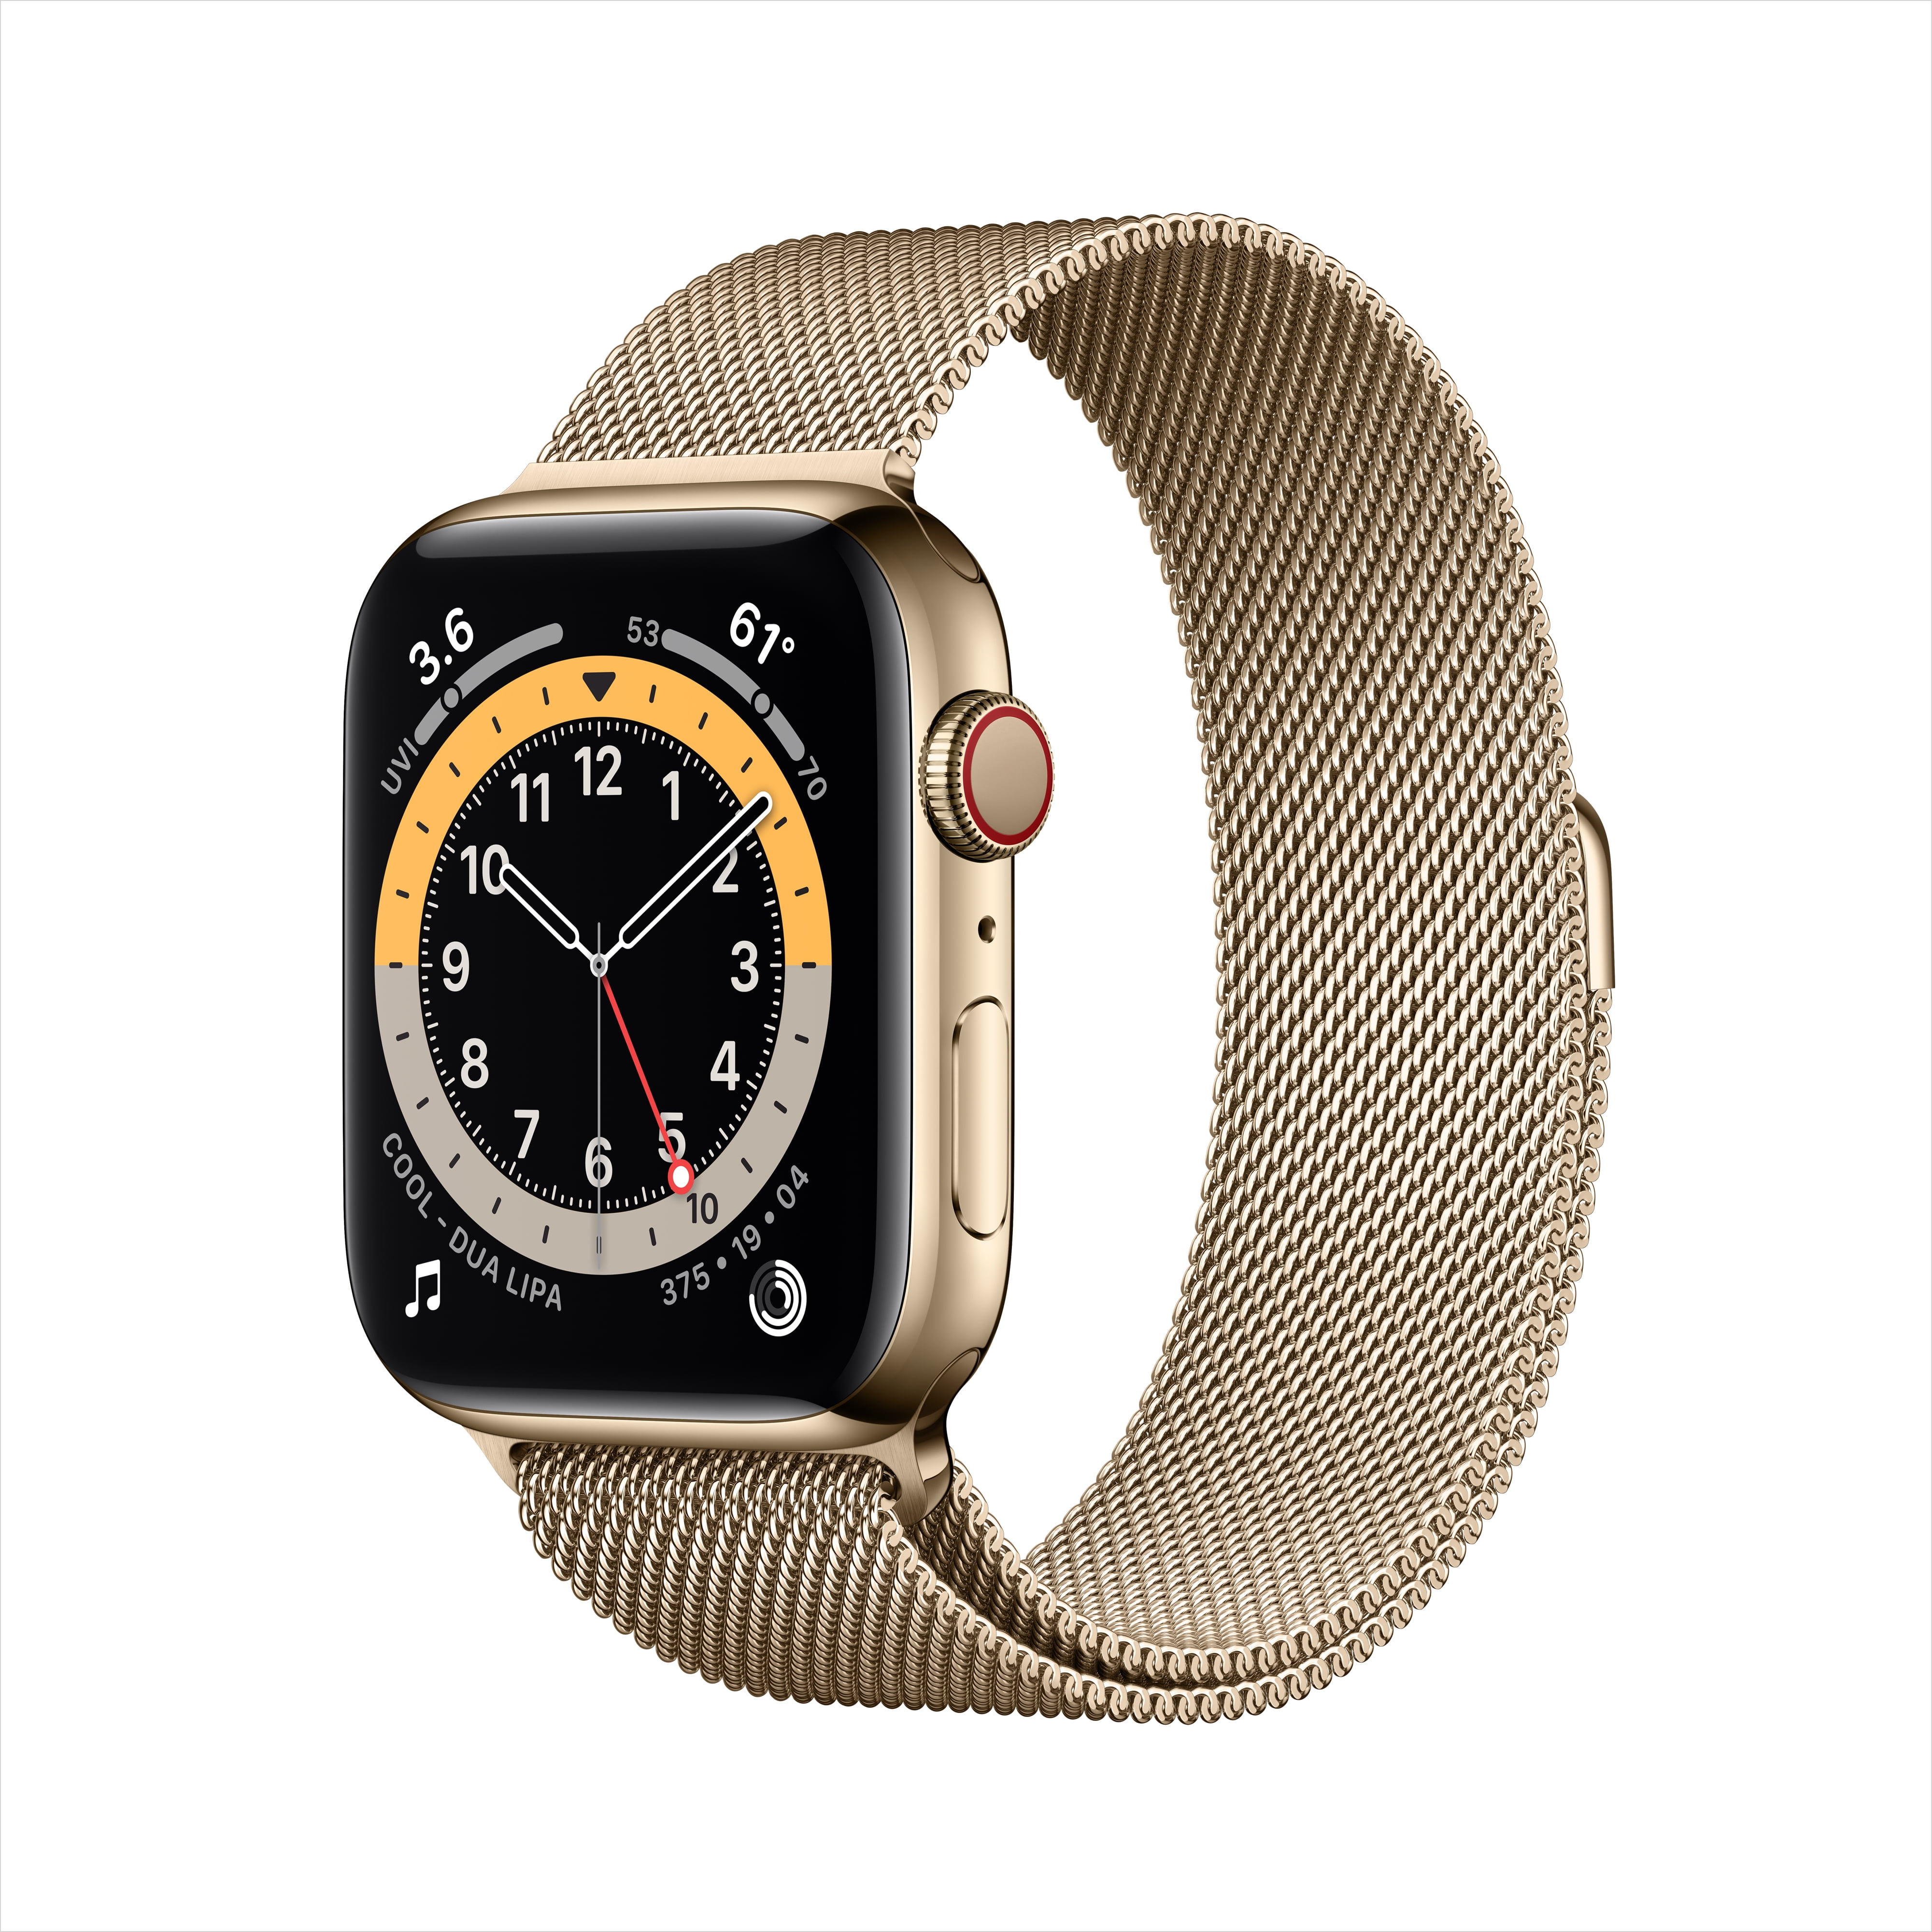 Apple Watch Series4 44mm gold stainless steel case GPS +cellerモデル